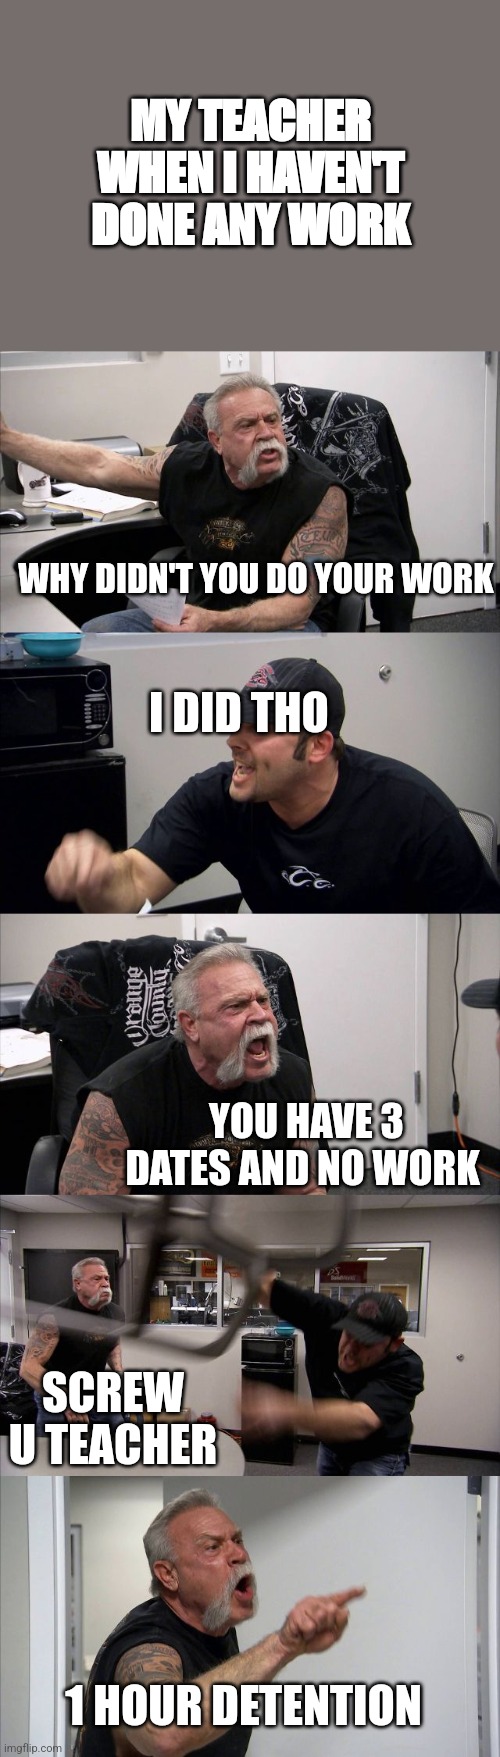 American Chopper Argument | MY TEACHER WHEN I HAVEN'T DONE ANY WORK; WHY DIDN'T YOU DO YOUR WORK; I DID THO; YOU HAVE 3 DATES AND NO WORK; SCREW U TEACHER; 1 HOUR DETENTION | image tagged in memes,american chopper argument | made w/ Imgflip meme maker